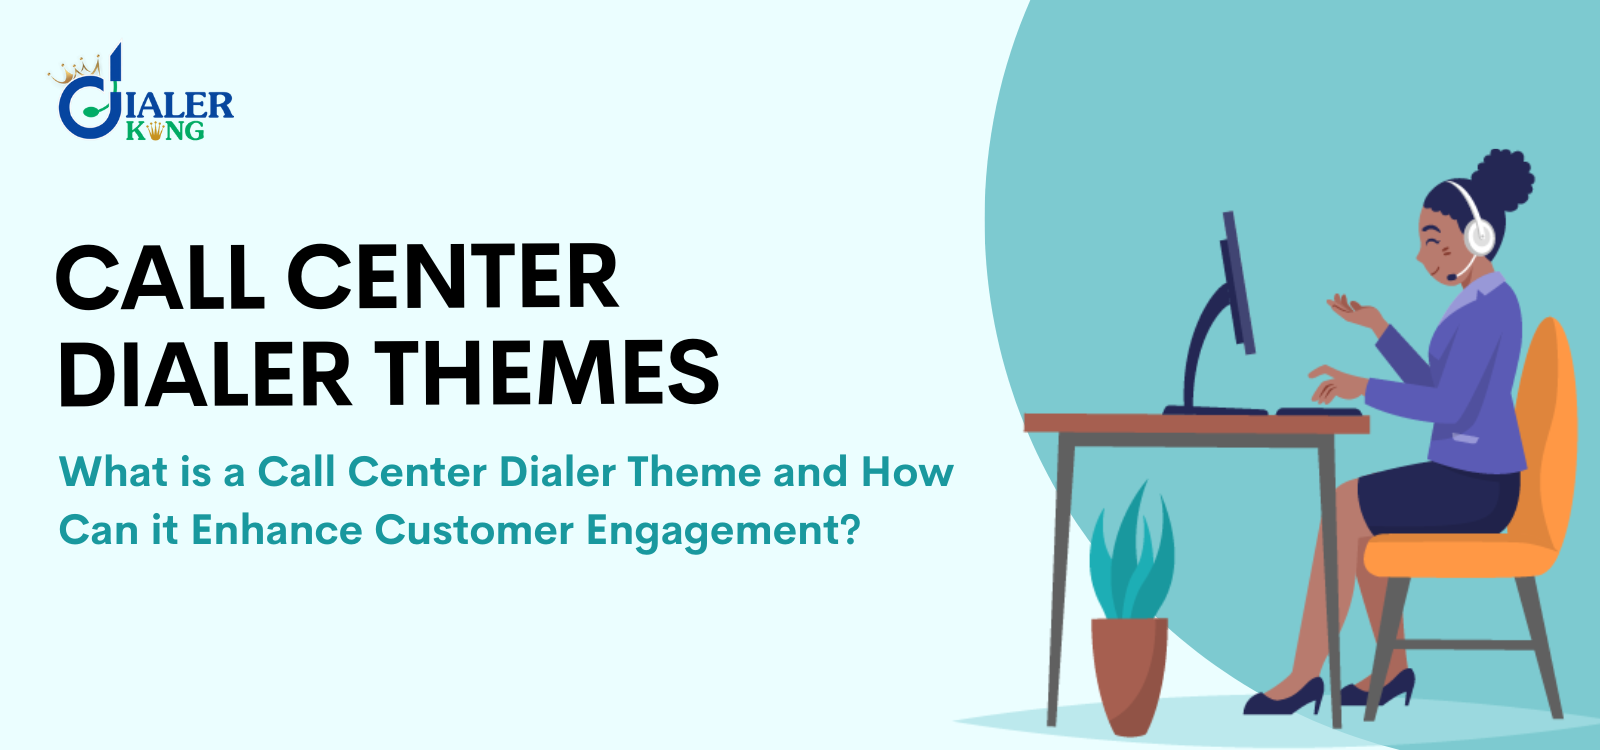 What is a Call Center Dialer Theme and How Can it Enhance Customer Engagement